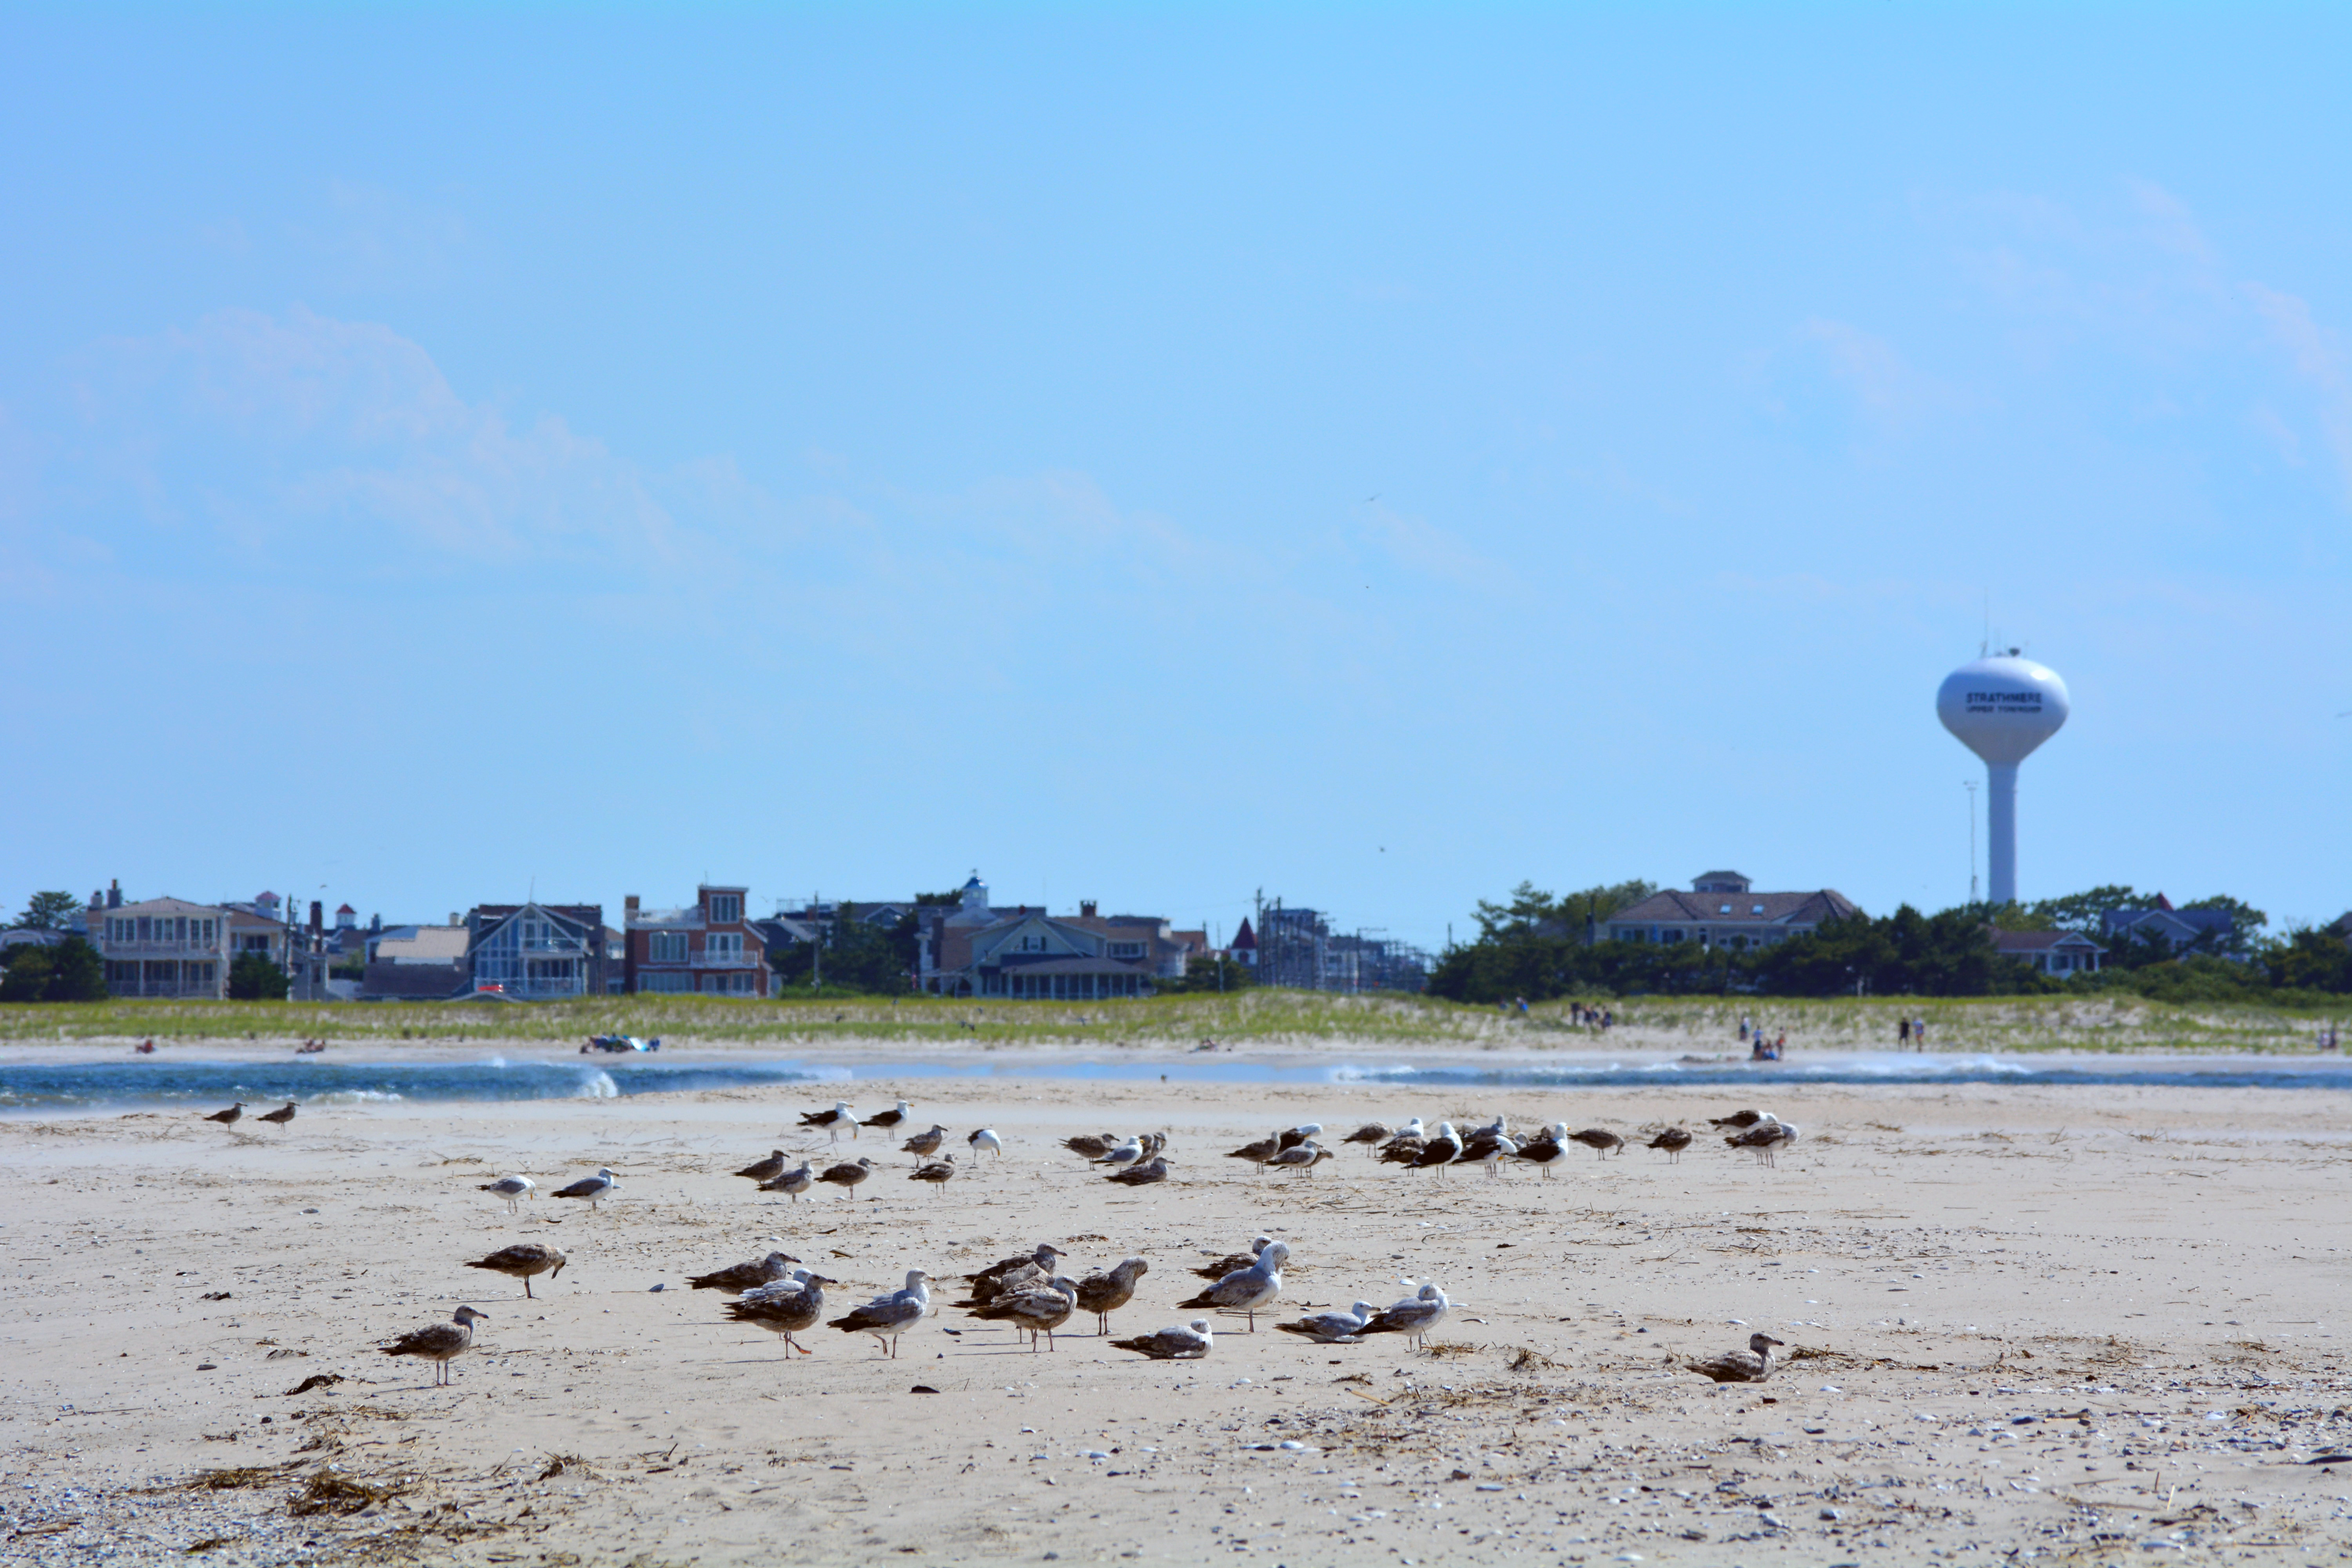 Seagulls on the beach in the foreground with beach houses in the background